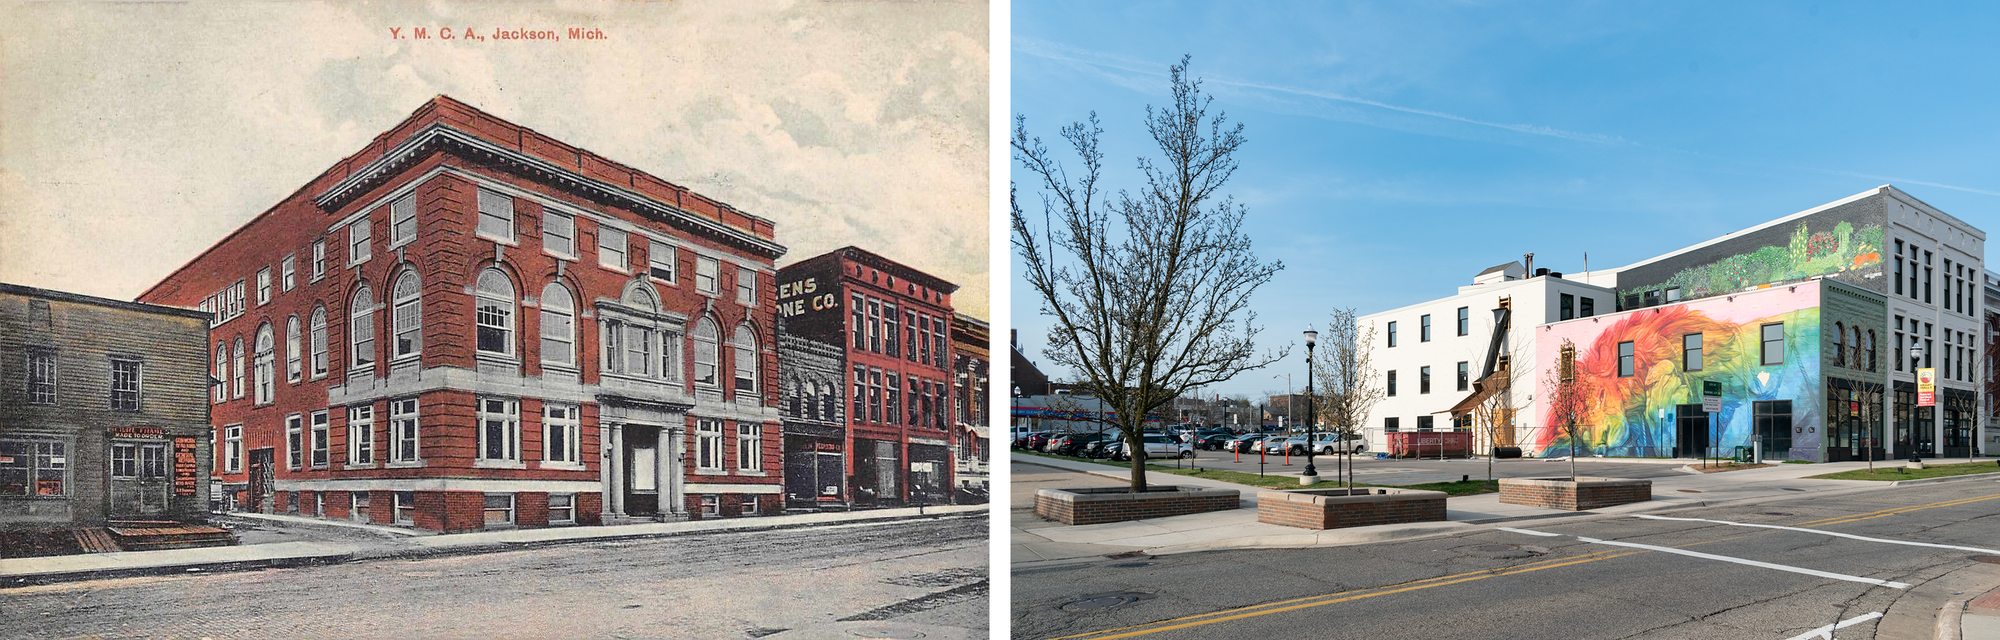 On the left, 1911 postcard with a wood frame two-story building, an alley, the 3.5 story masonry YMCA, a two-story stone building, three story brick building. On the right, 2021 photo, two buildings demolished for a parking lot, murals on the restored survivors.